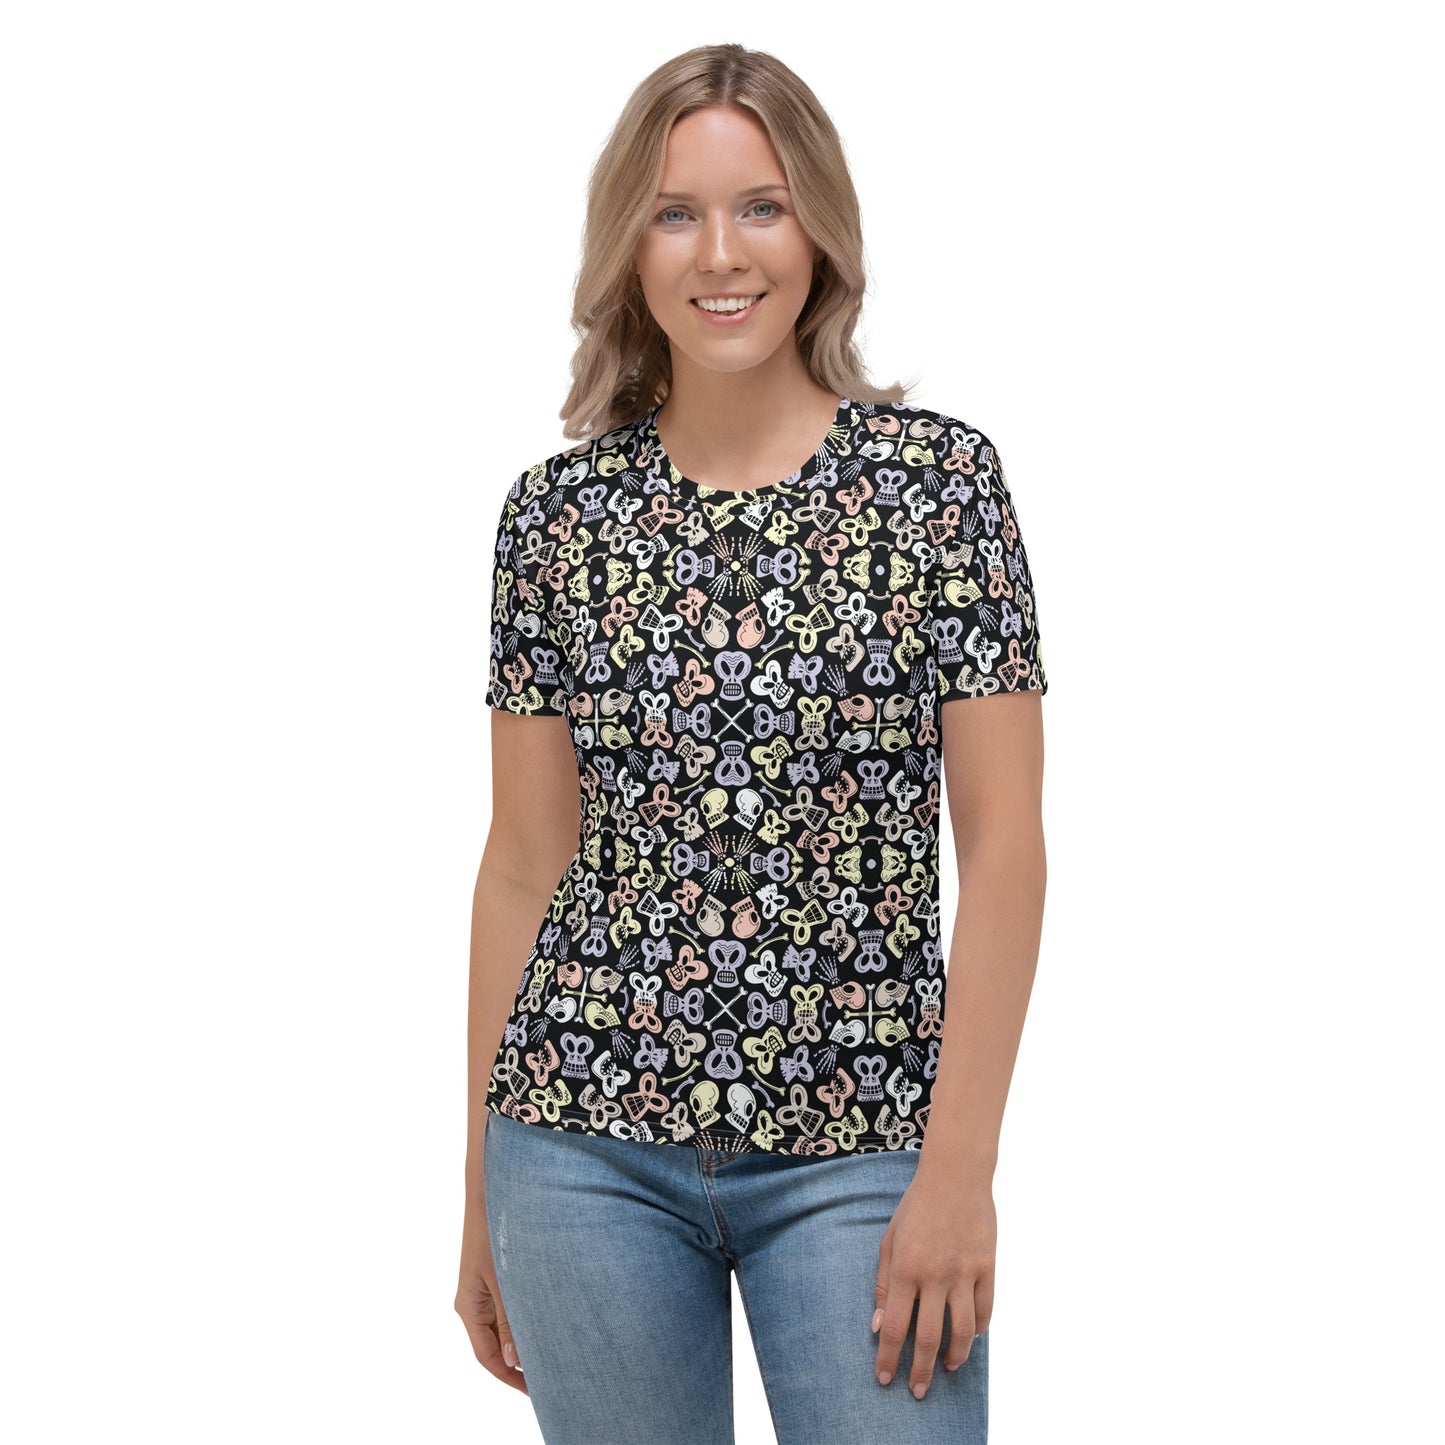 Bewitched Skulls: Hauntingly Chic Pattern Design - Women's T-shirt